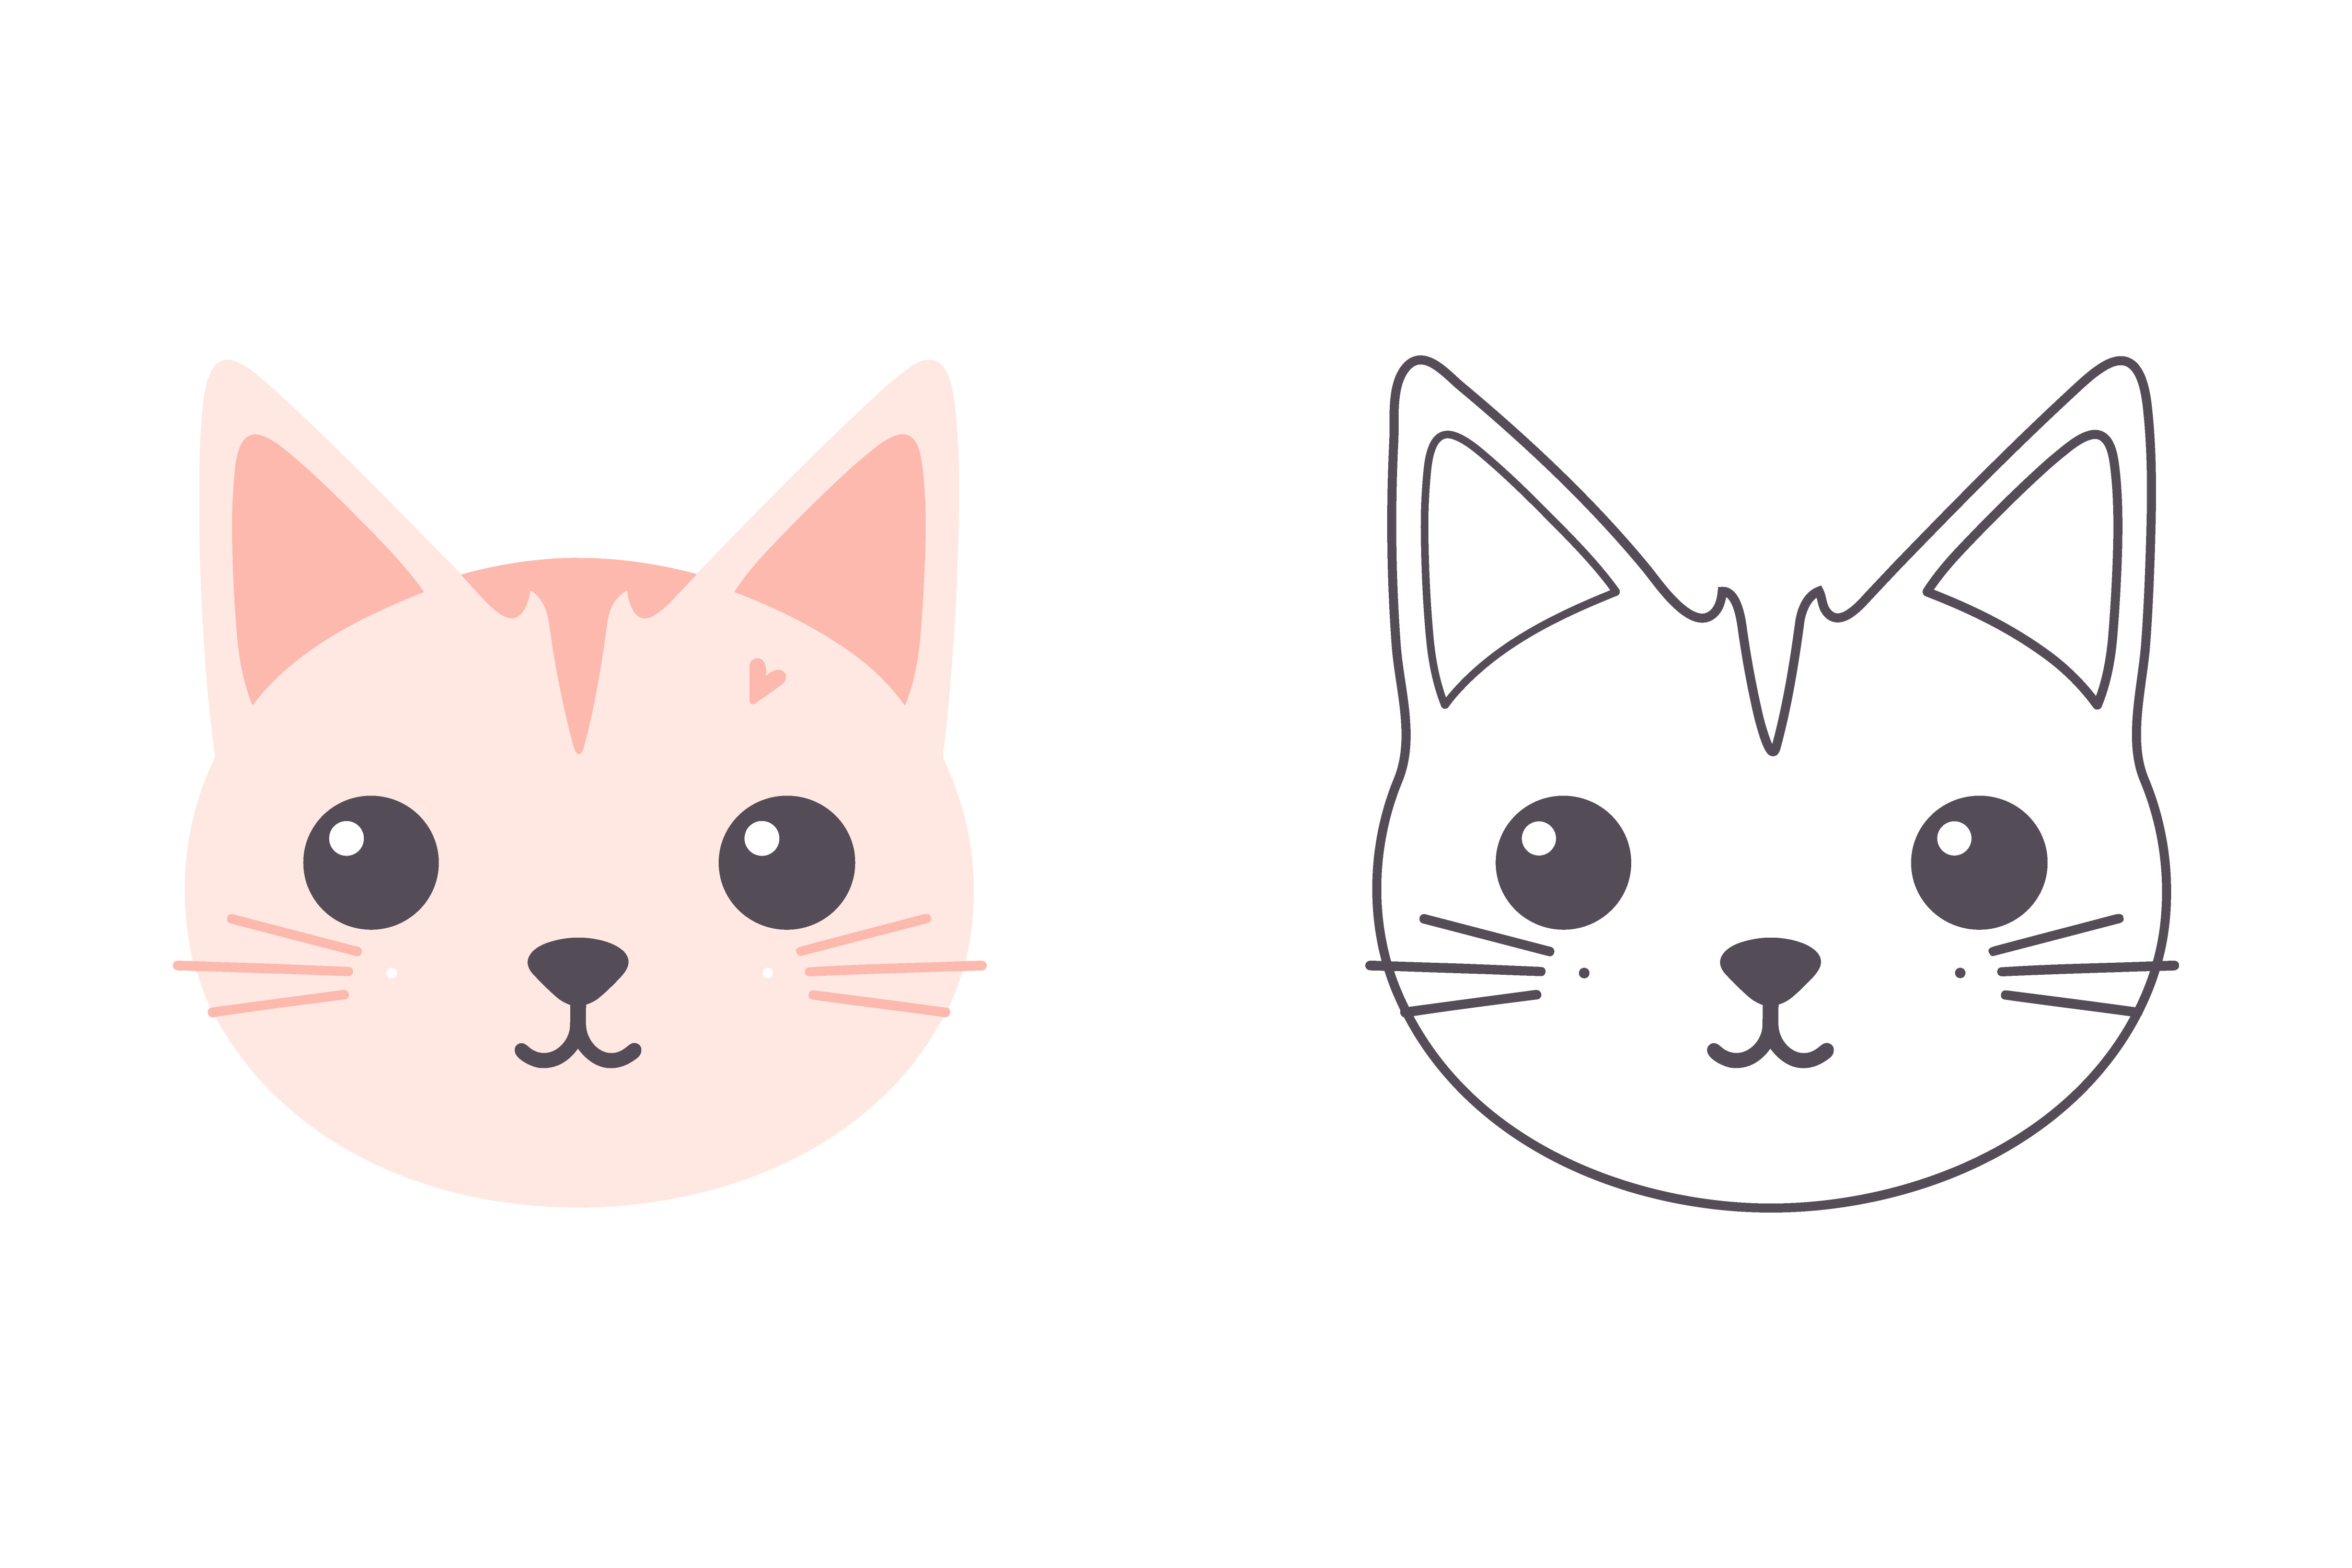 Kawaii Cat Flat Icon Vector, Cat Icons Graphic by T-Shirt Pond